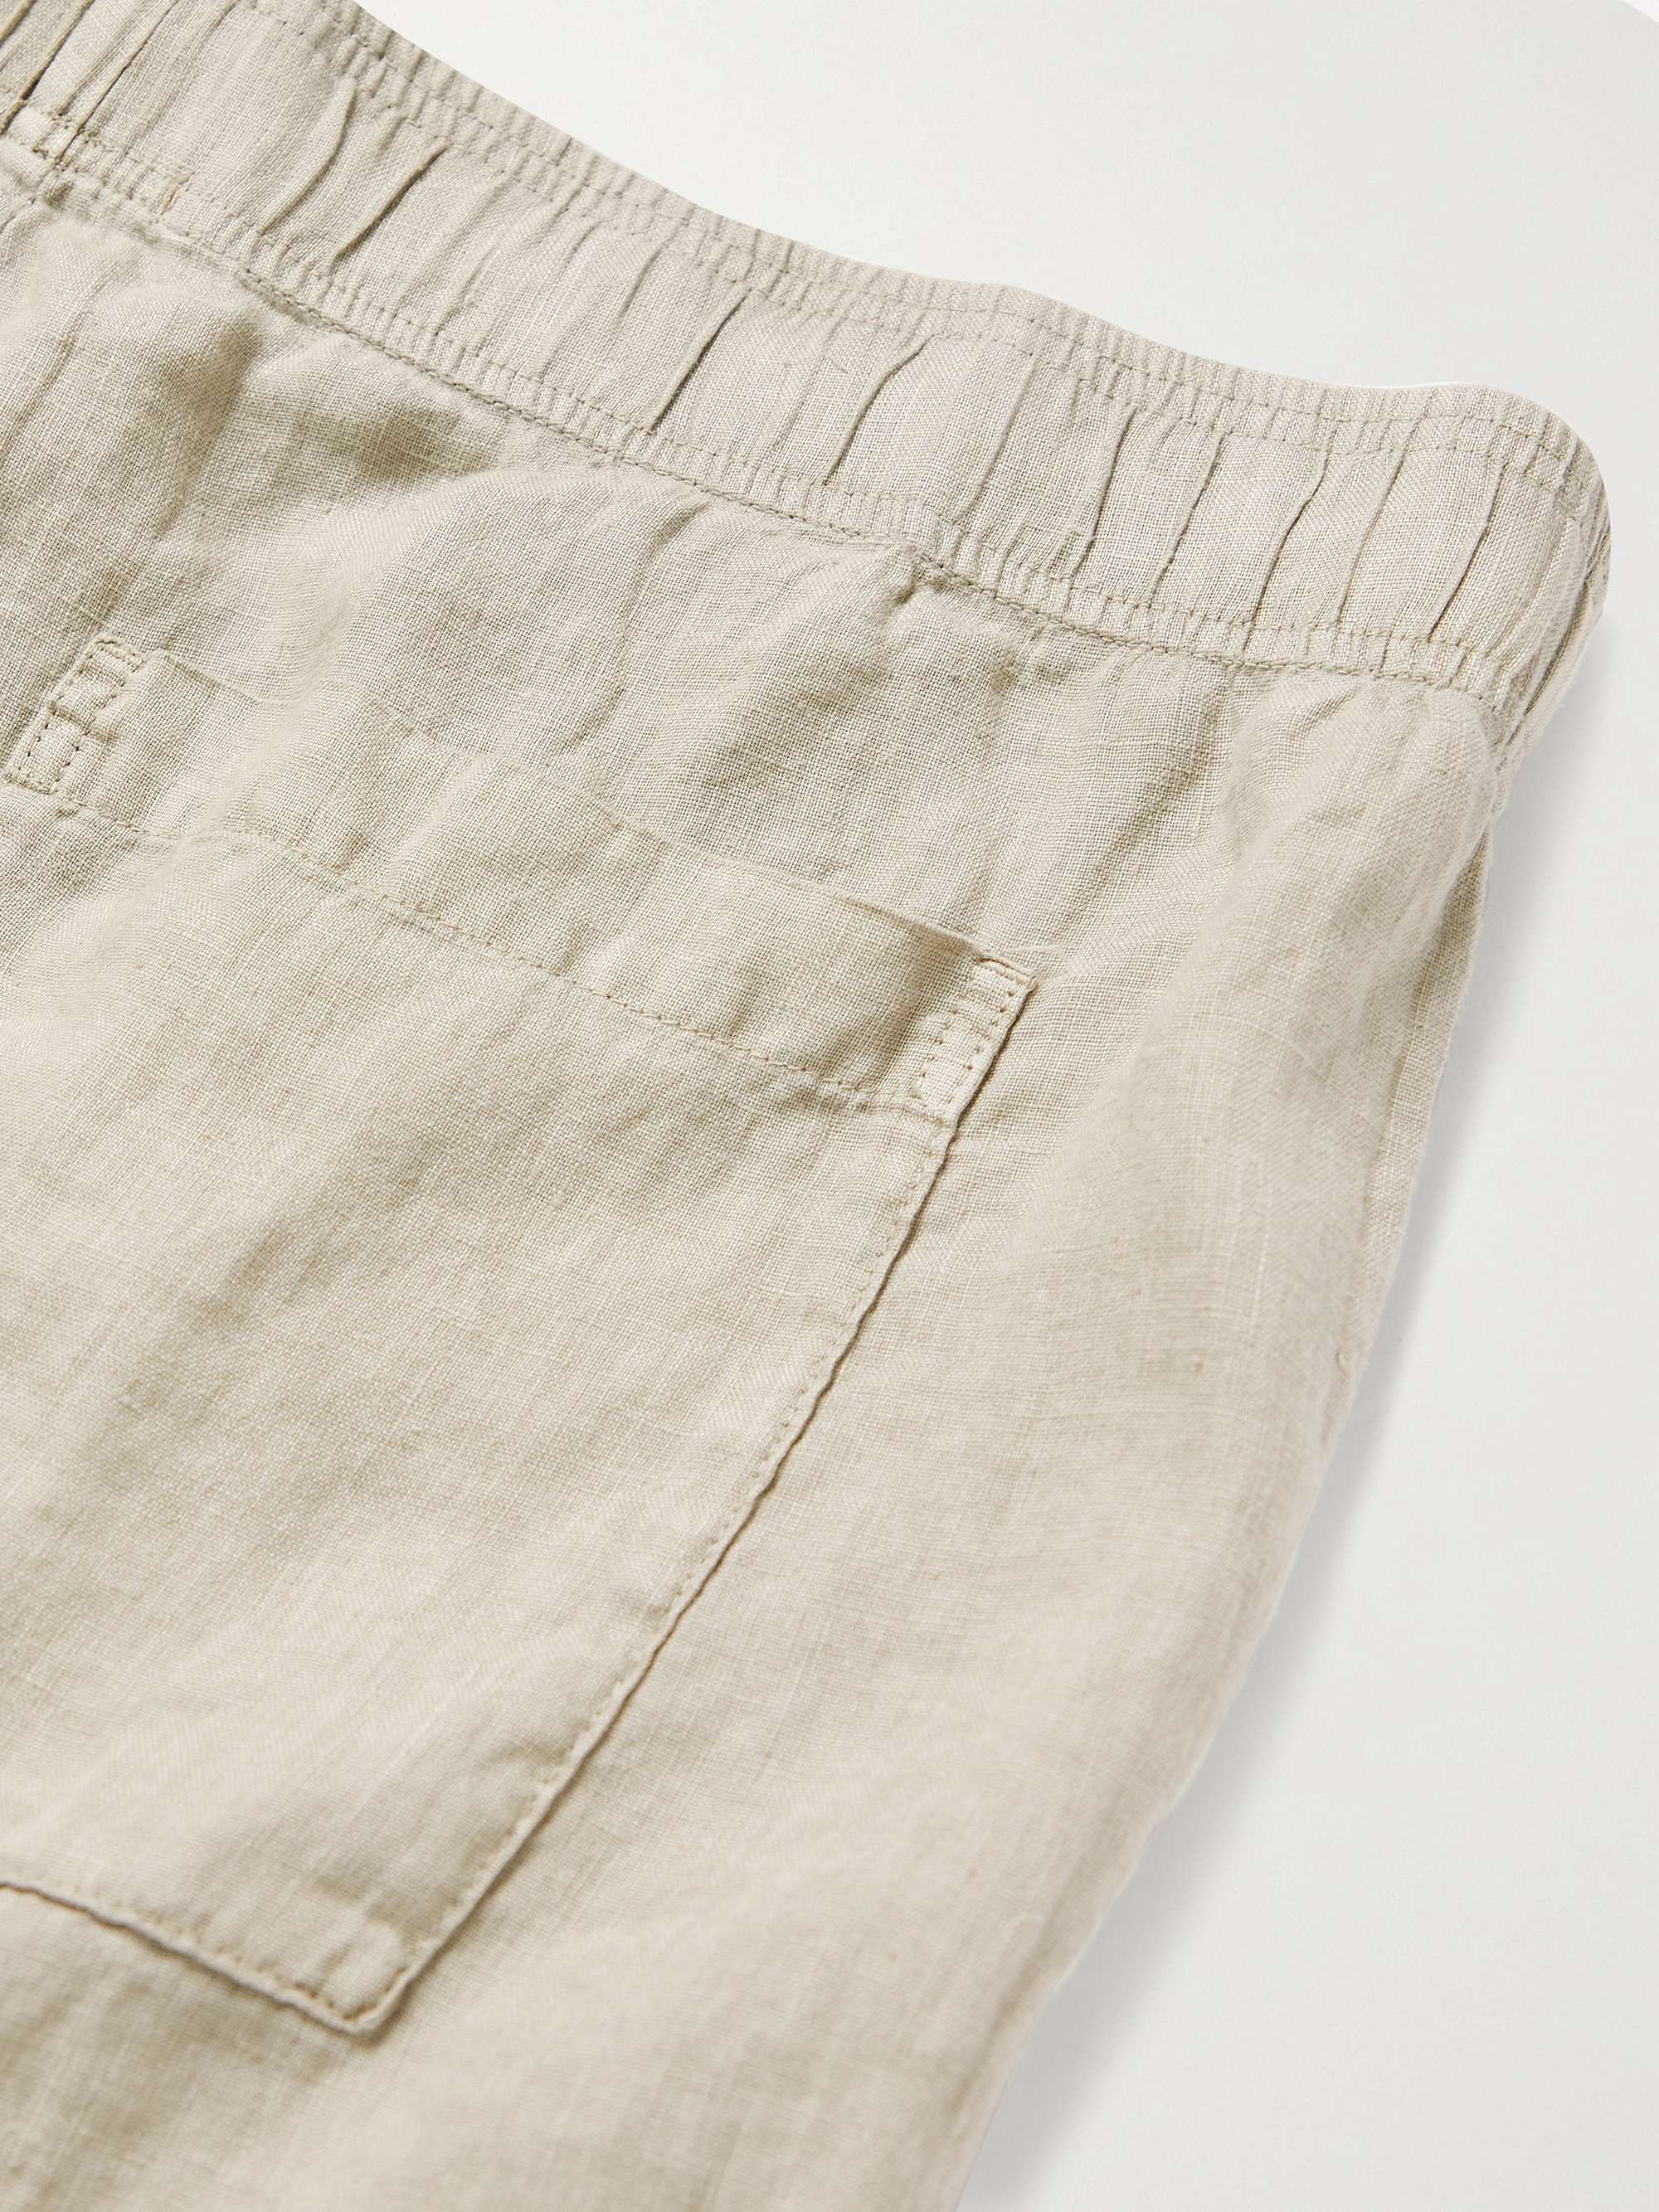 JAMES PERSE Linen Drawstring Trousers